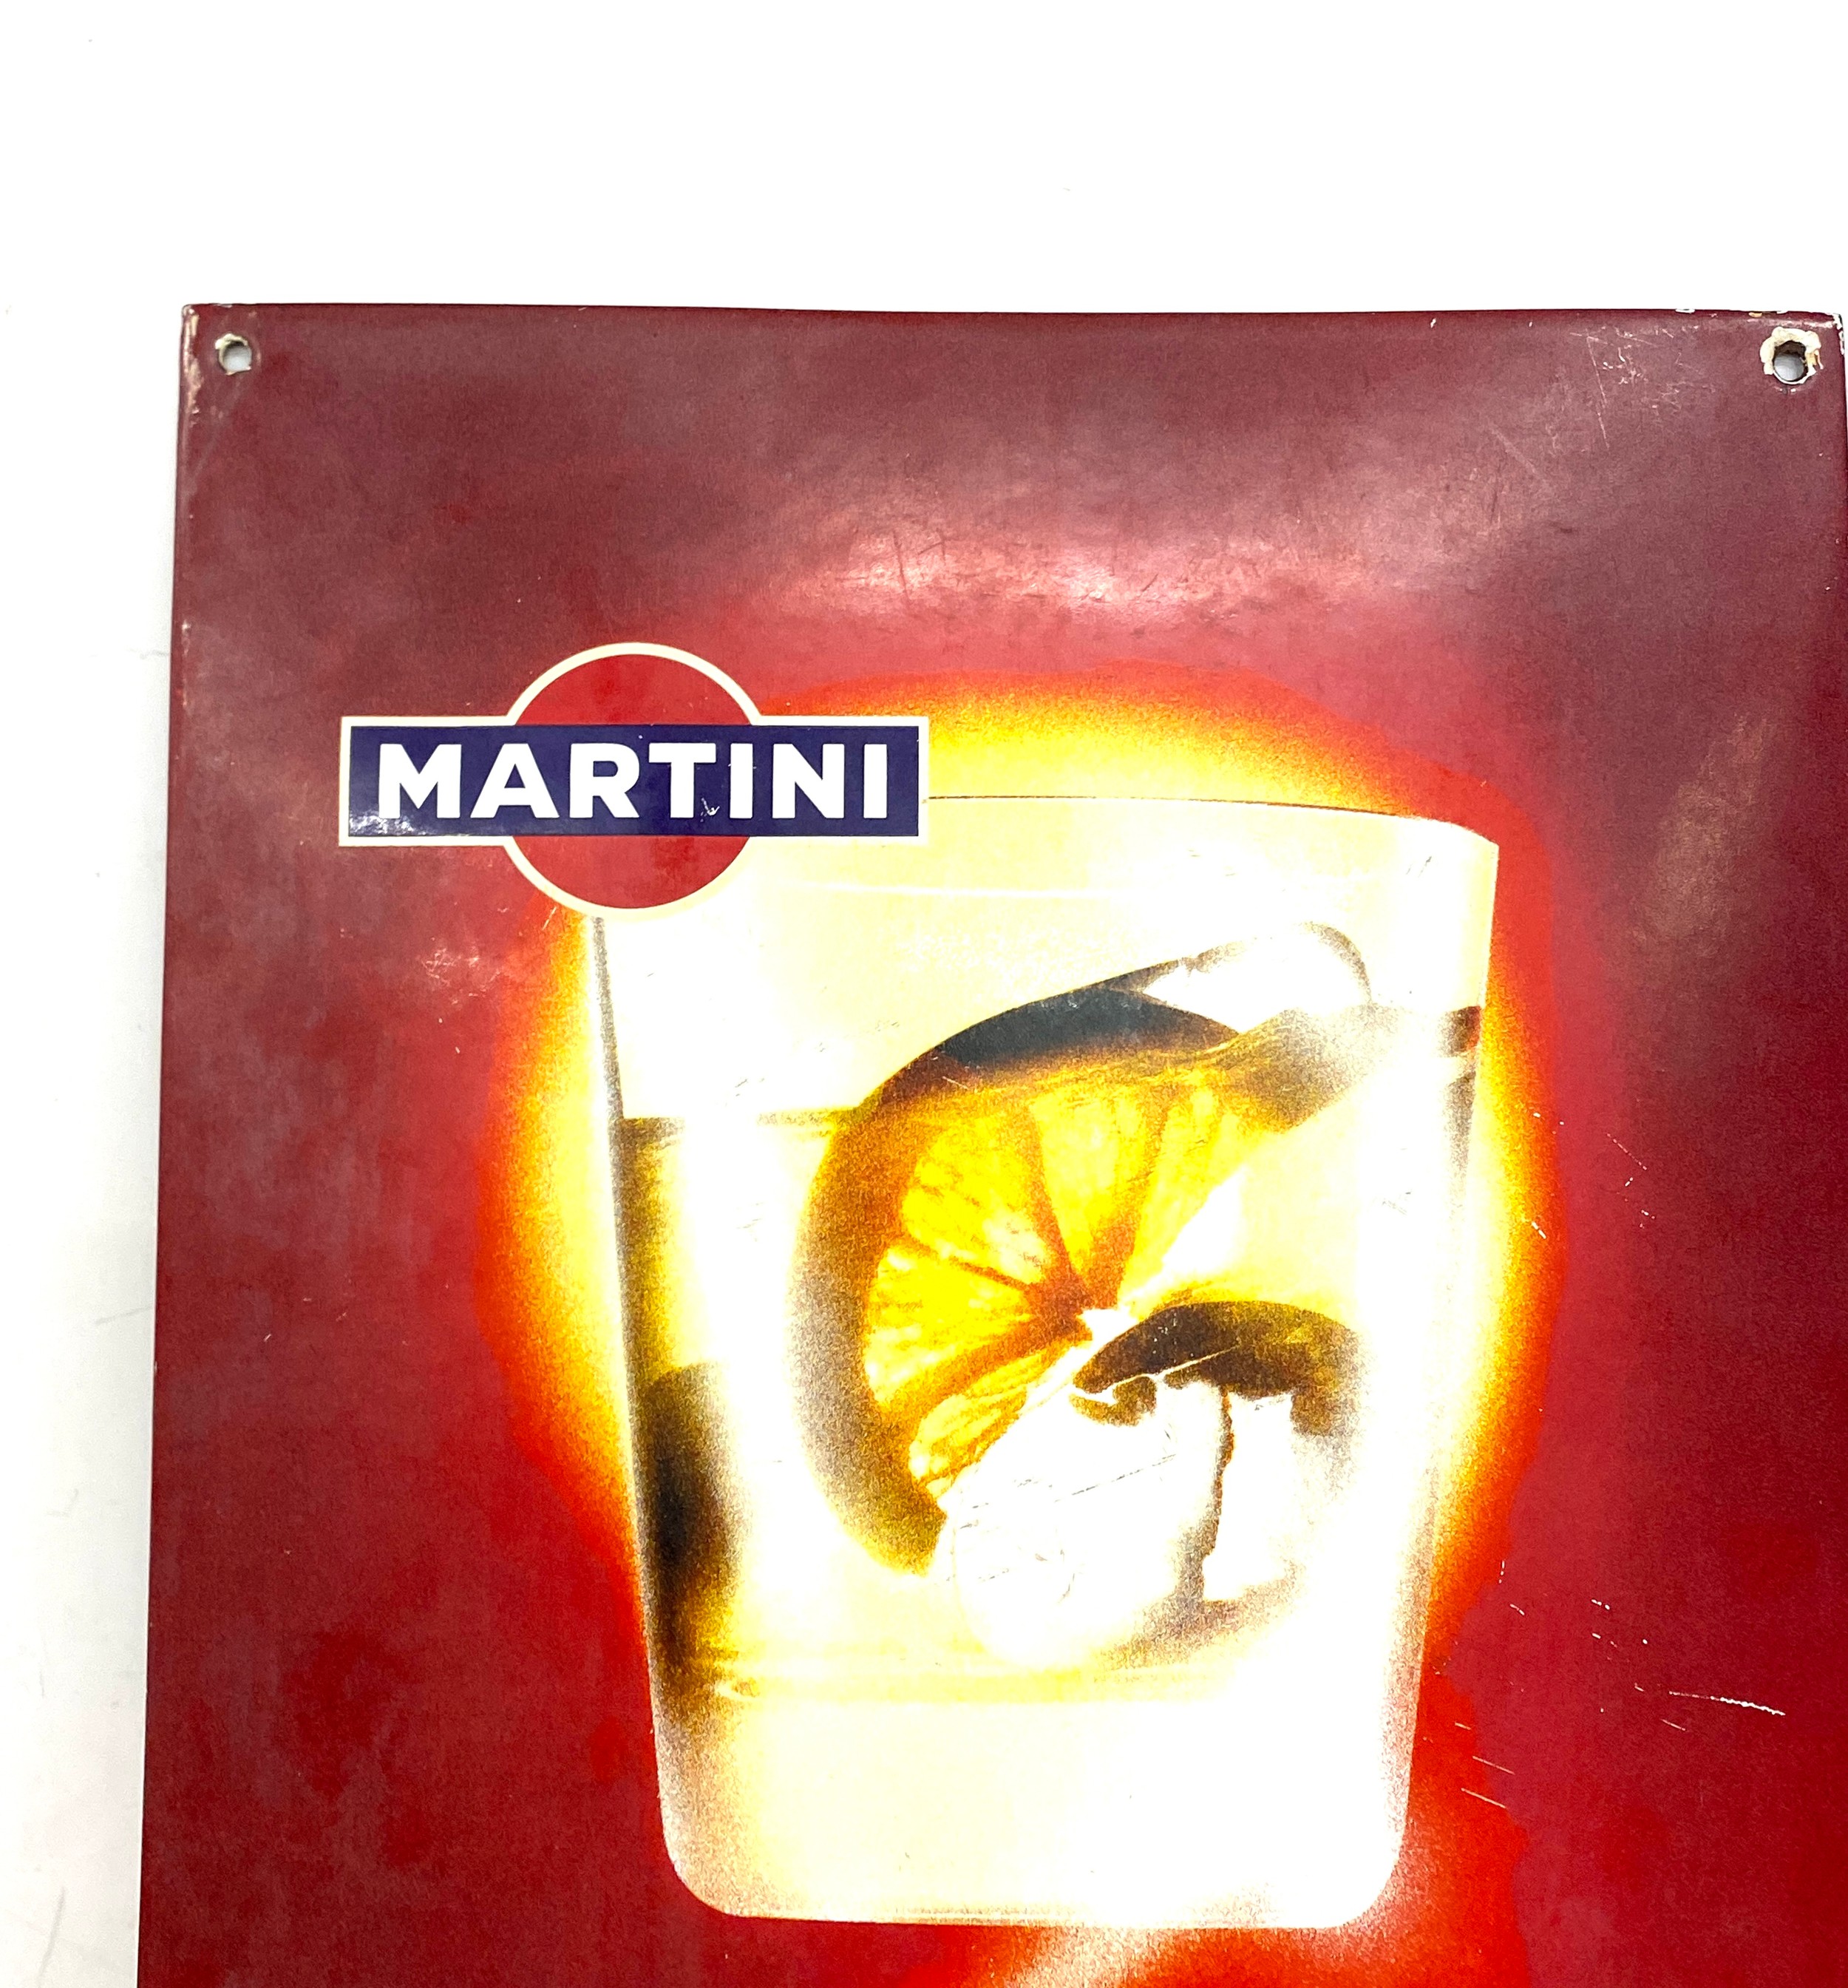 Vintage metal try a cool Martini sign, approximate measurements: Height 17.5 inches, Width 12 inches - Image 2 of 4